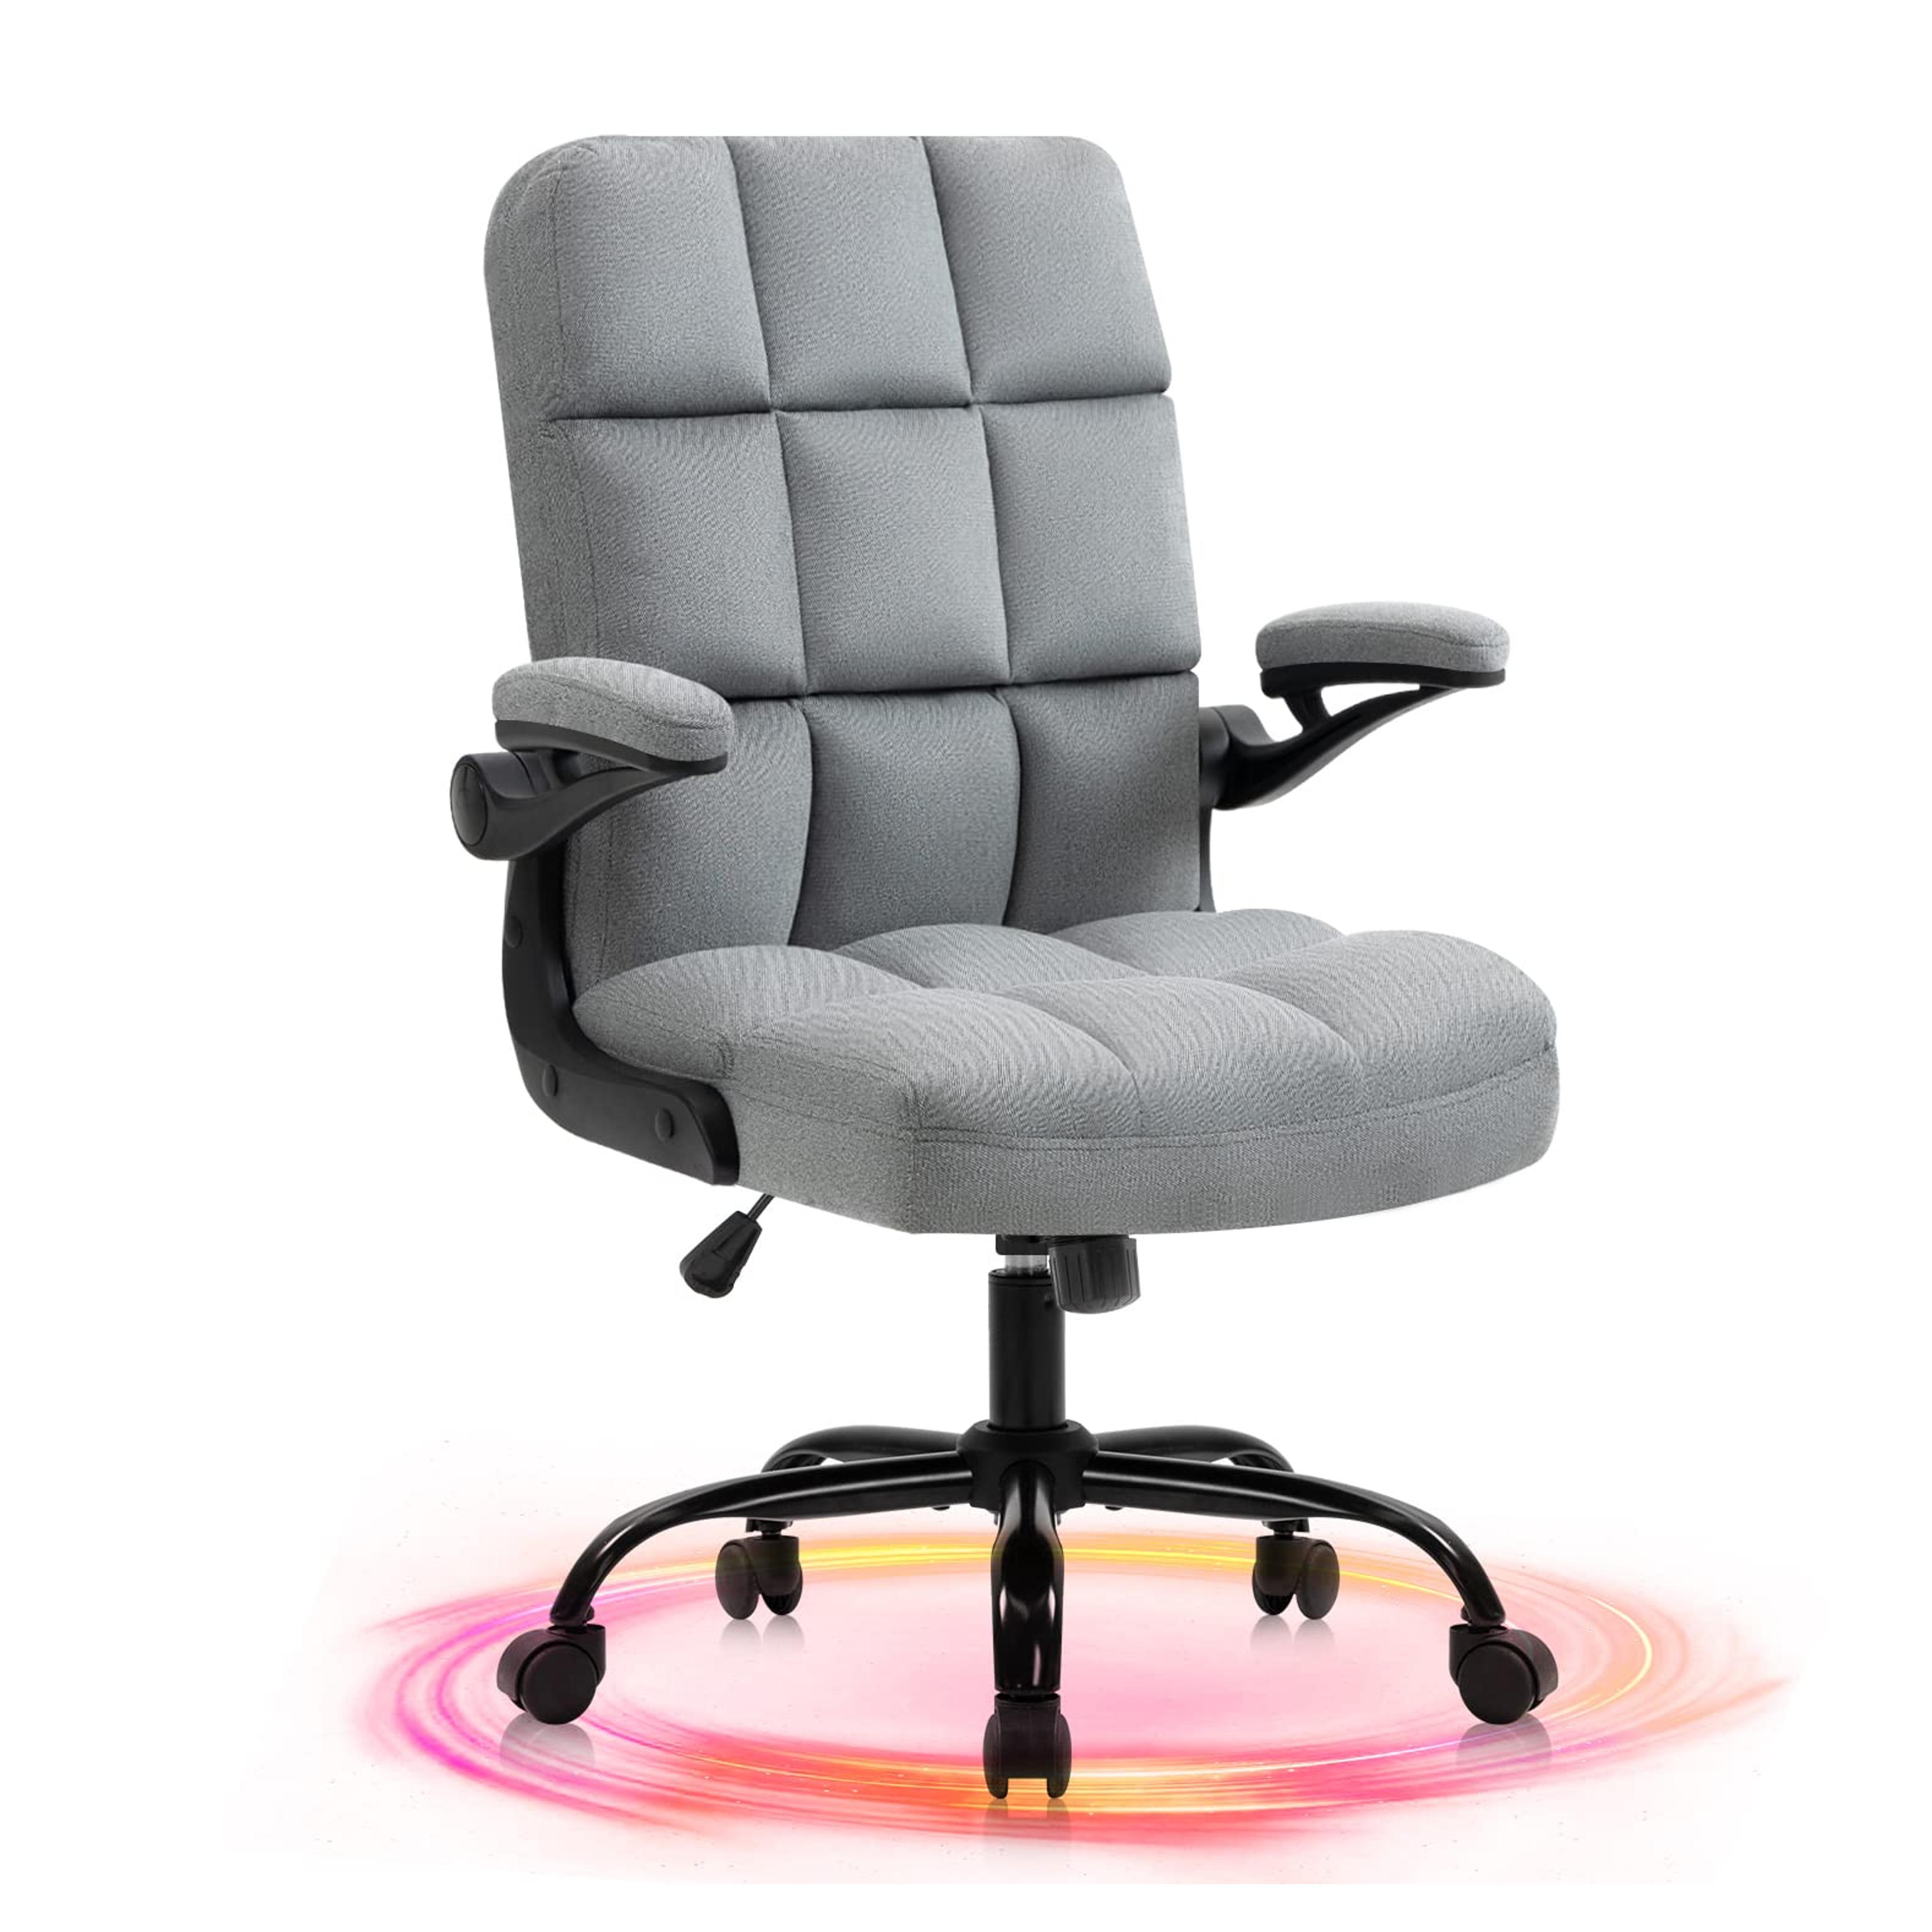 Amazon.com: SEATZONE Home Office Chair Ergonomic Executive Desk Chair Comfortable Computer Chair with Flip-up Arms,Faux Fur Chair with Lumbar Support,Pink : Office Products